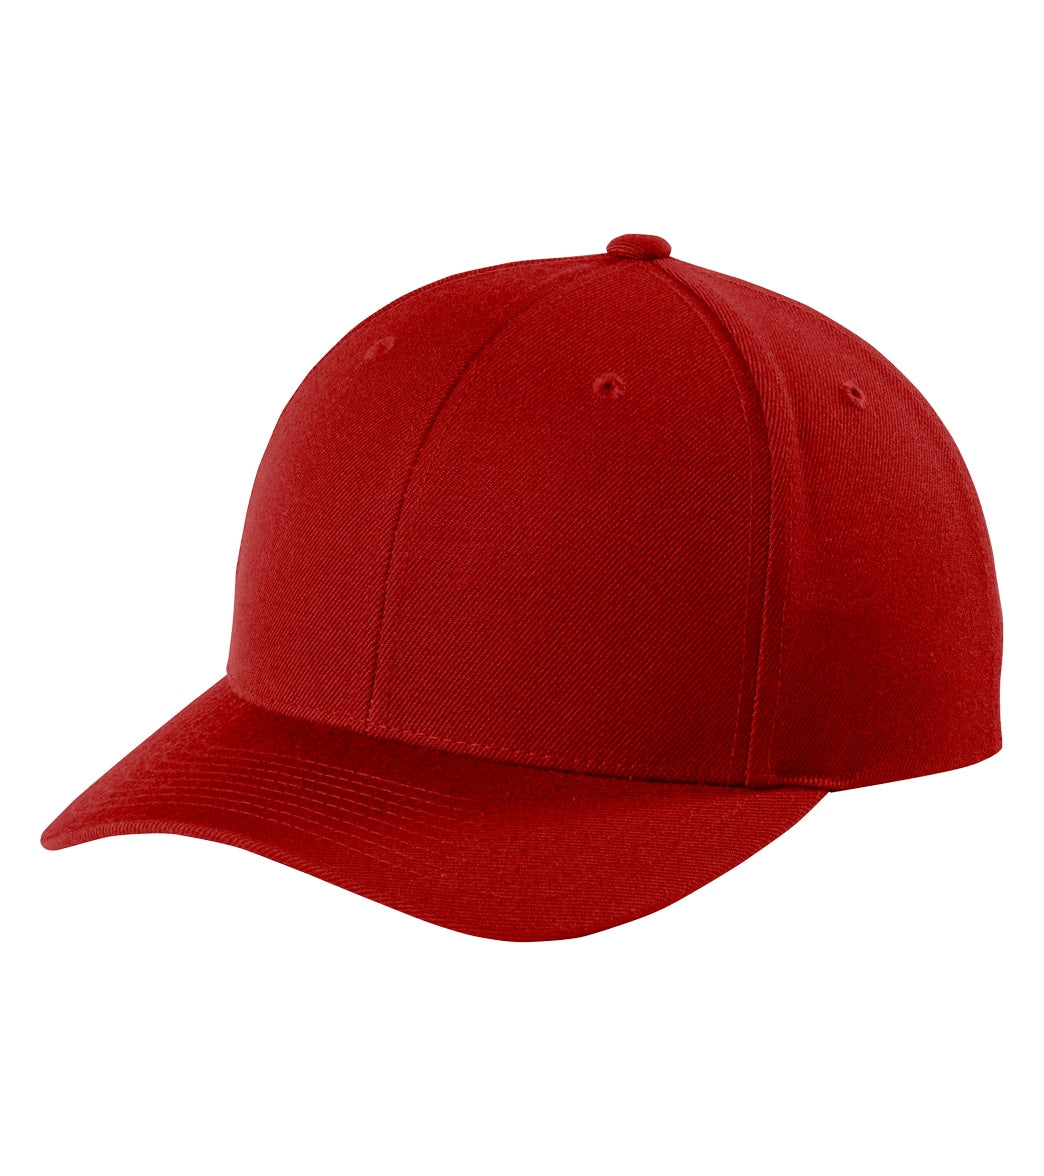 SwimOutlet Structured Snapback Hat